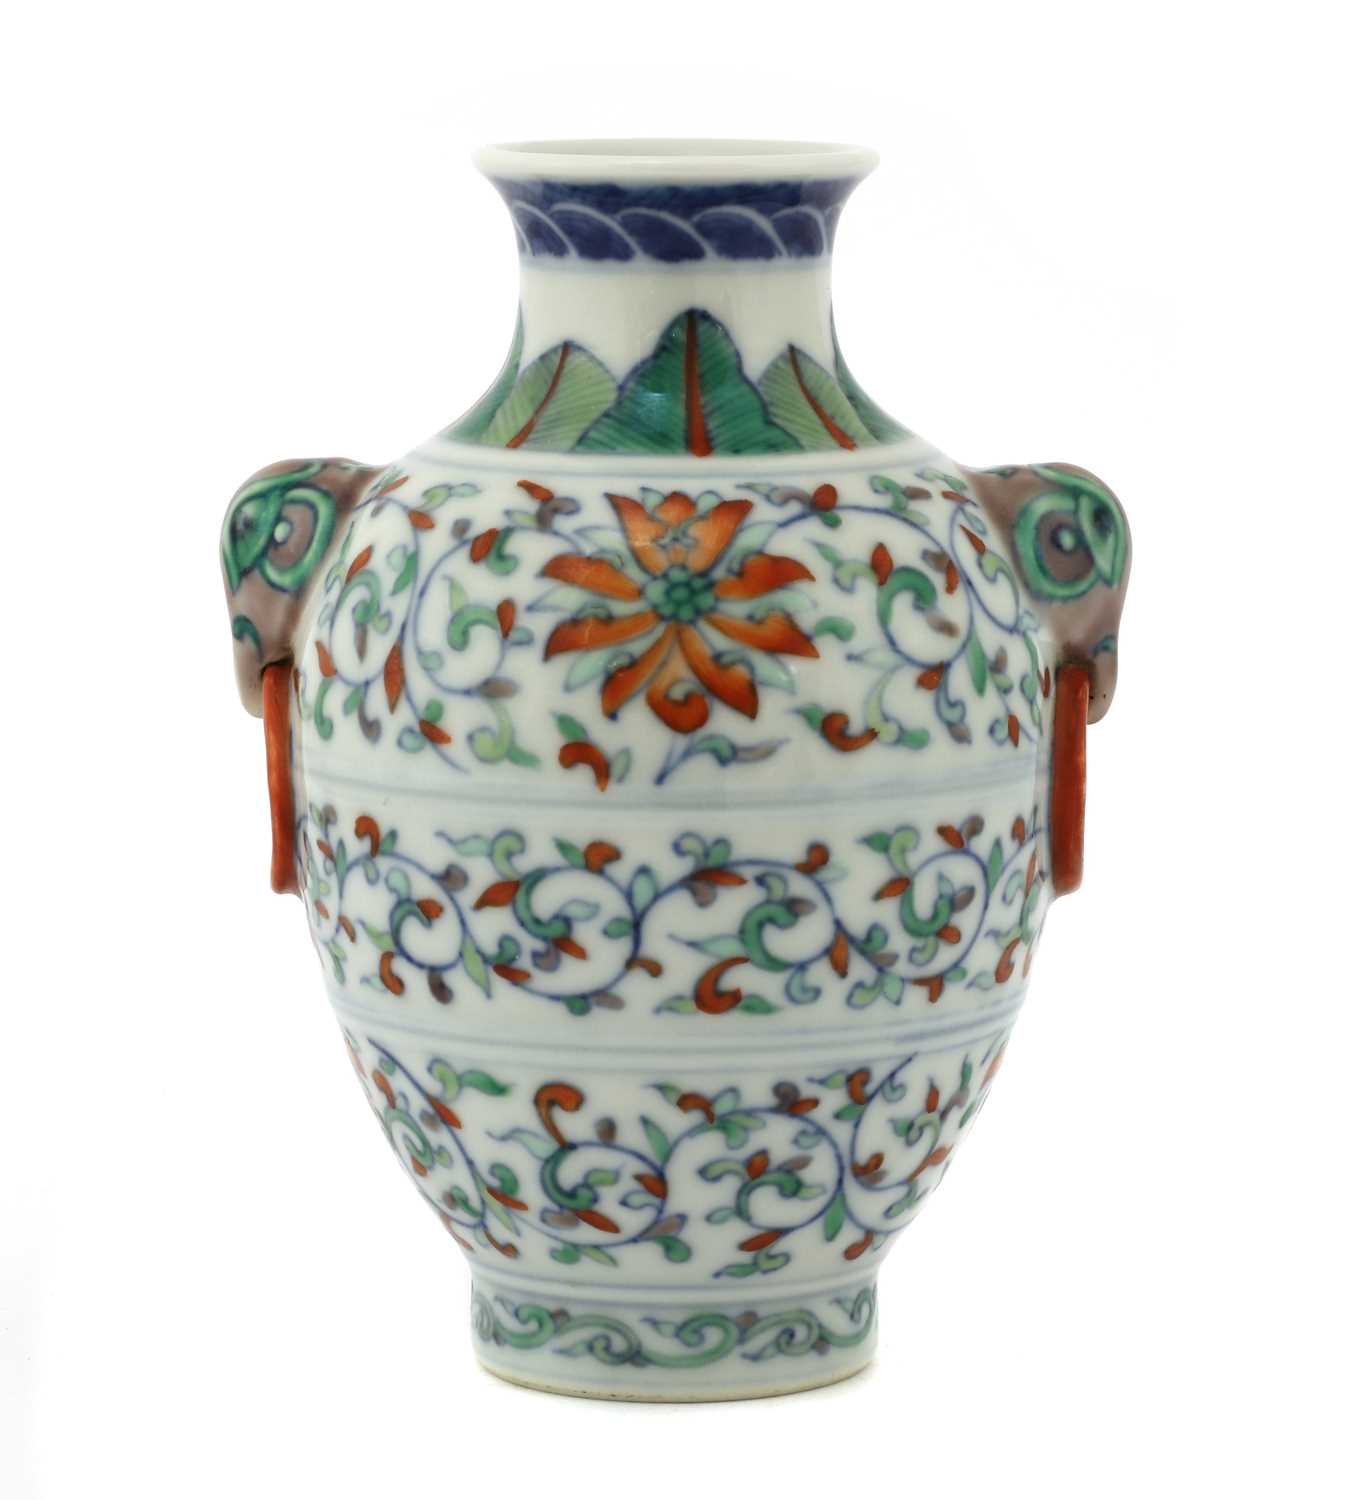 Lot 58 - A Chinese doucai vase